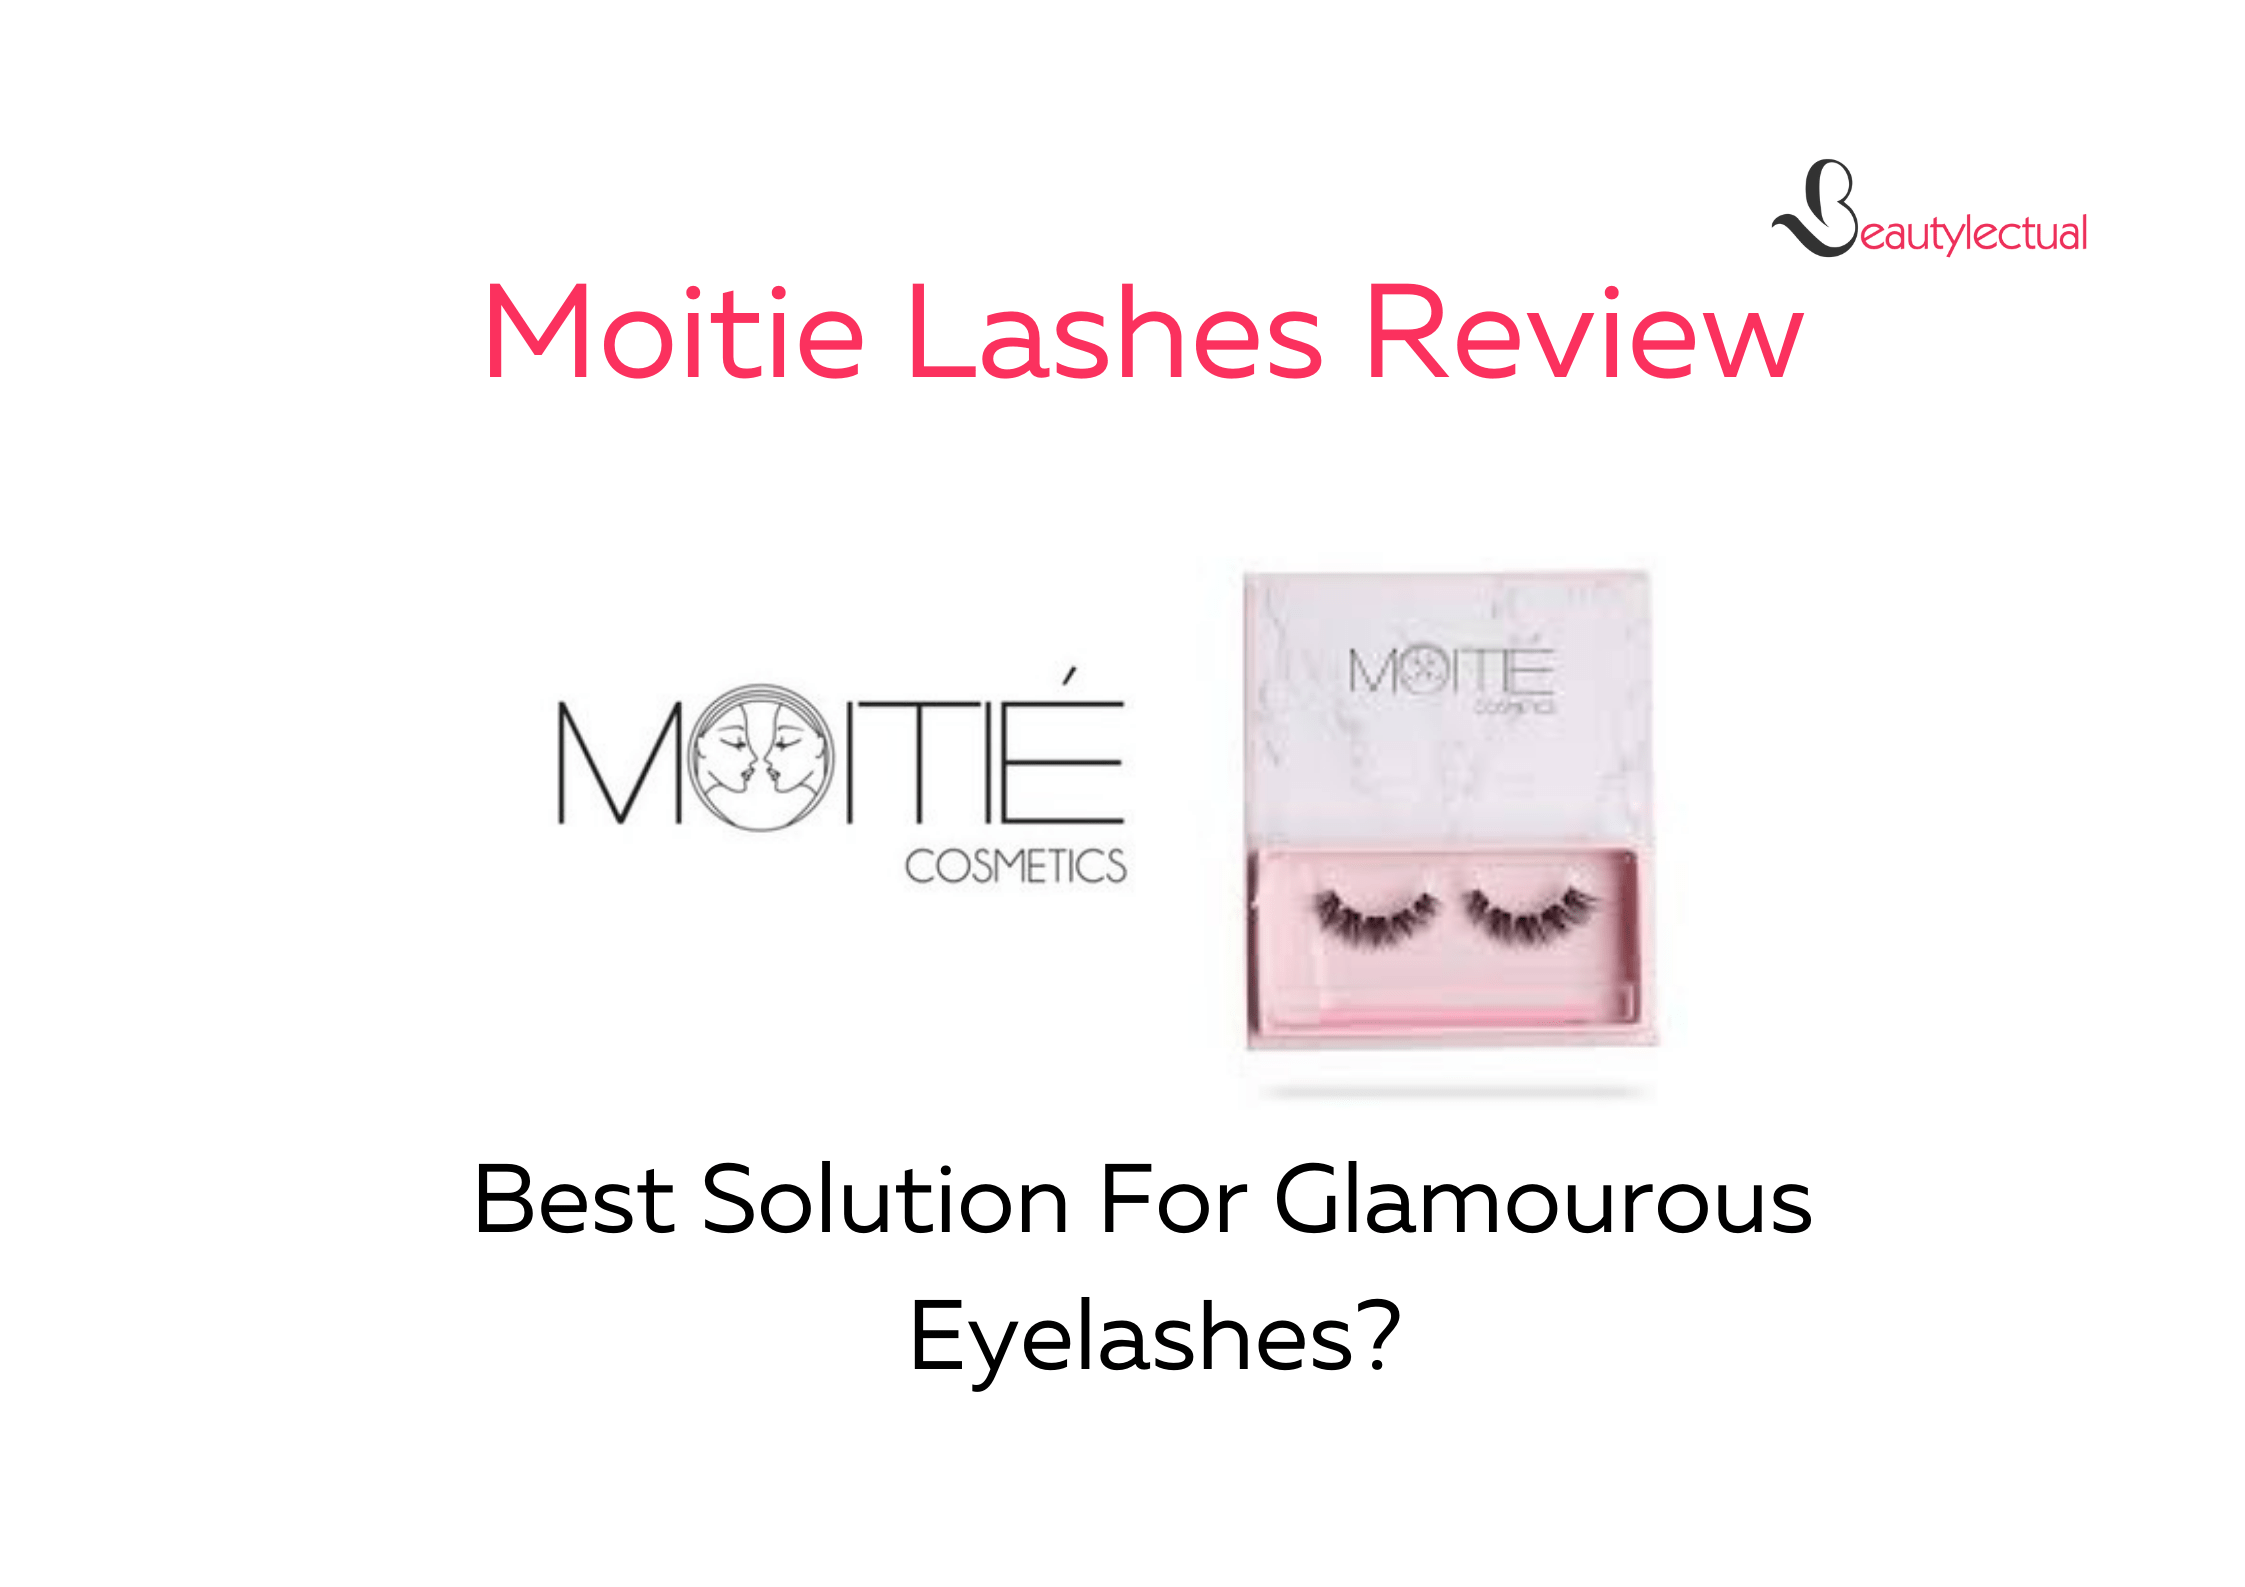 Moitie Lashes Reviews